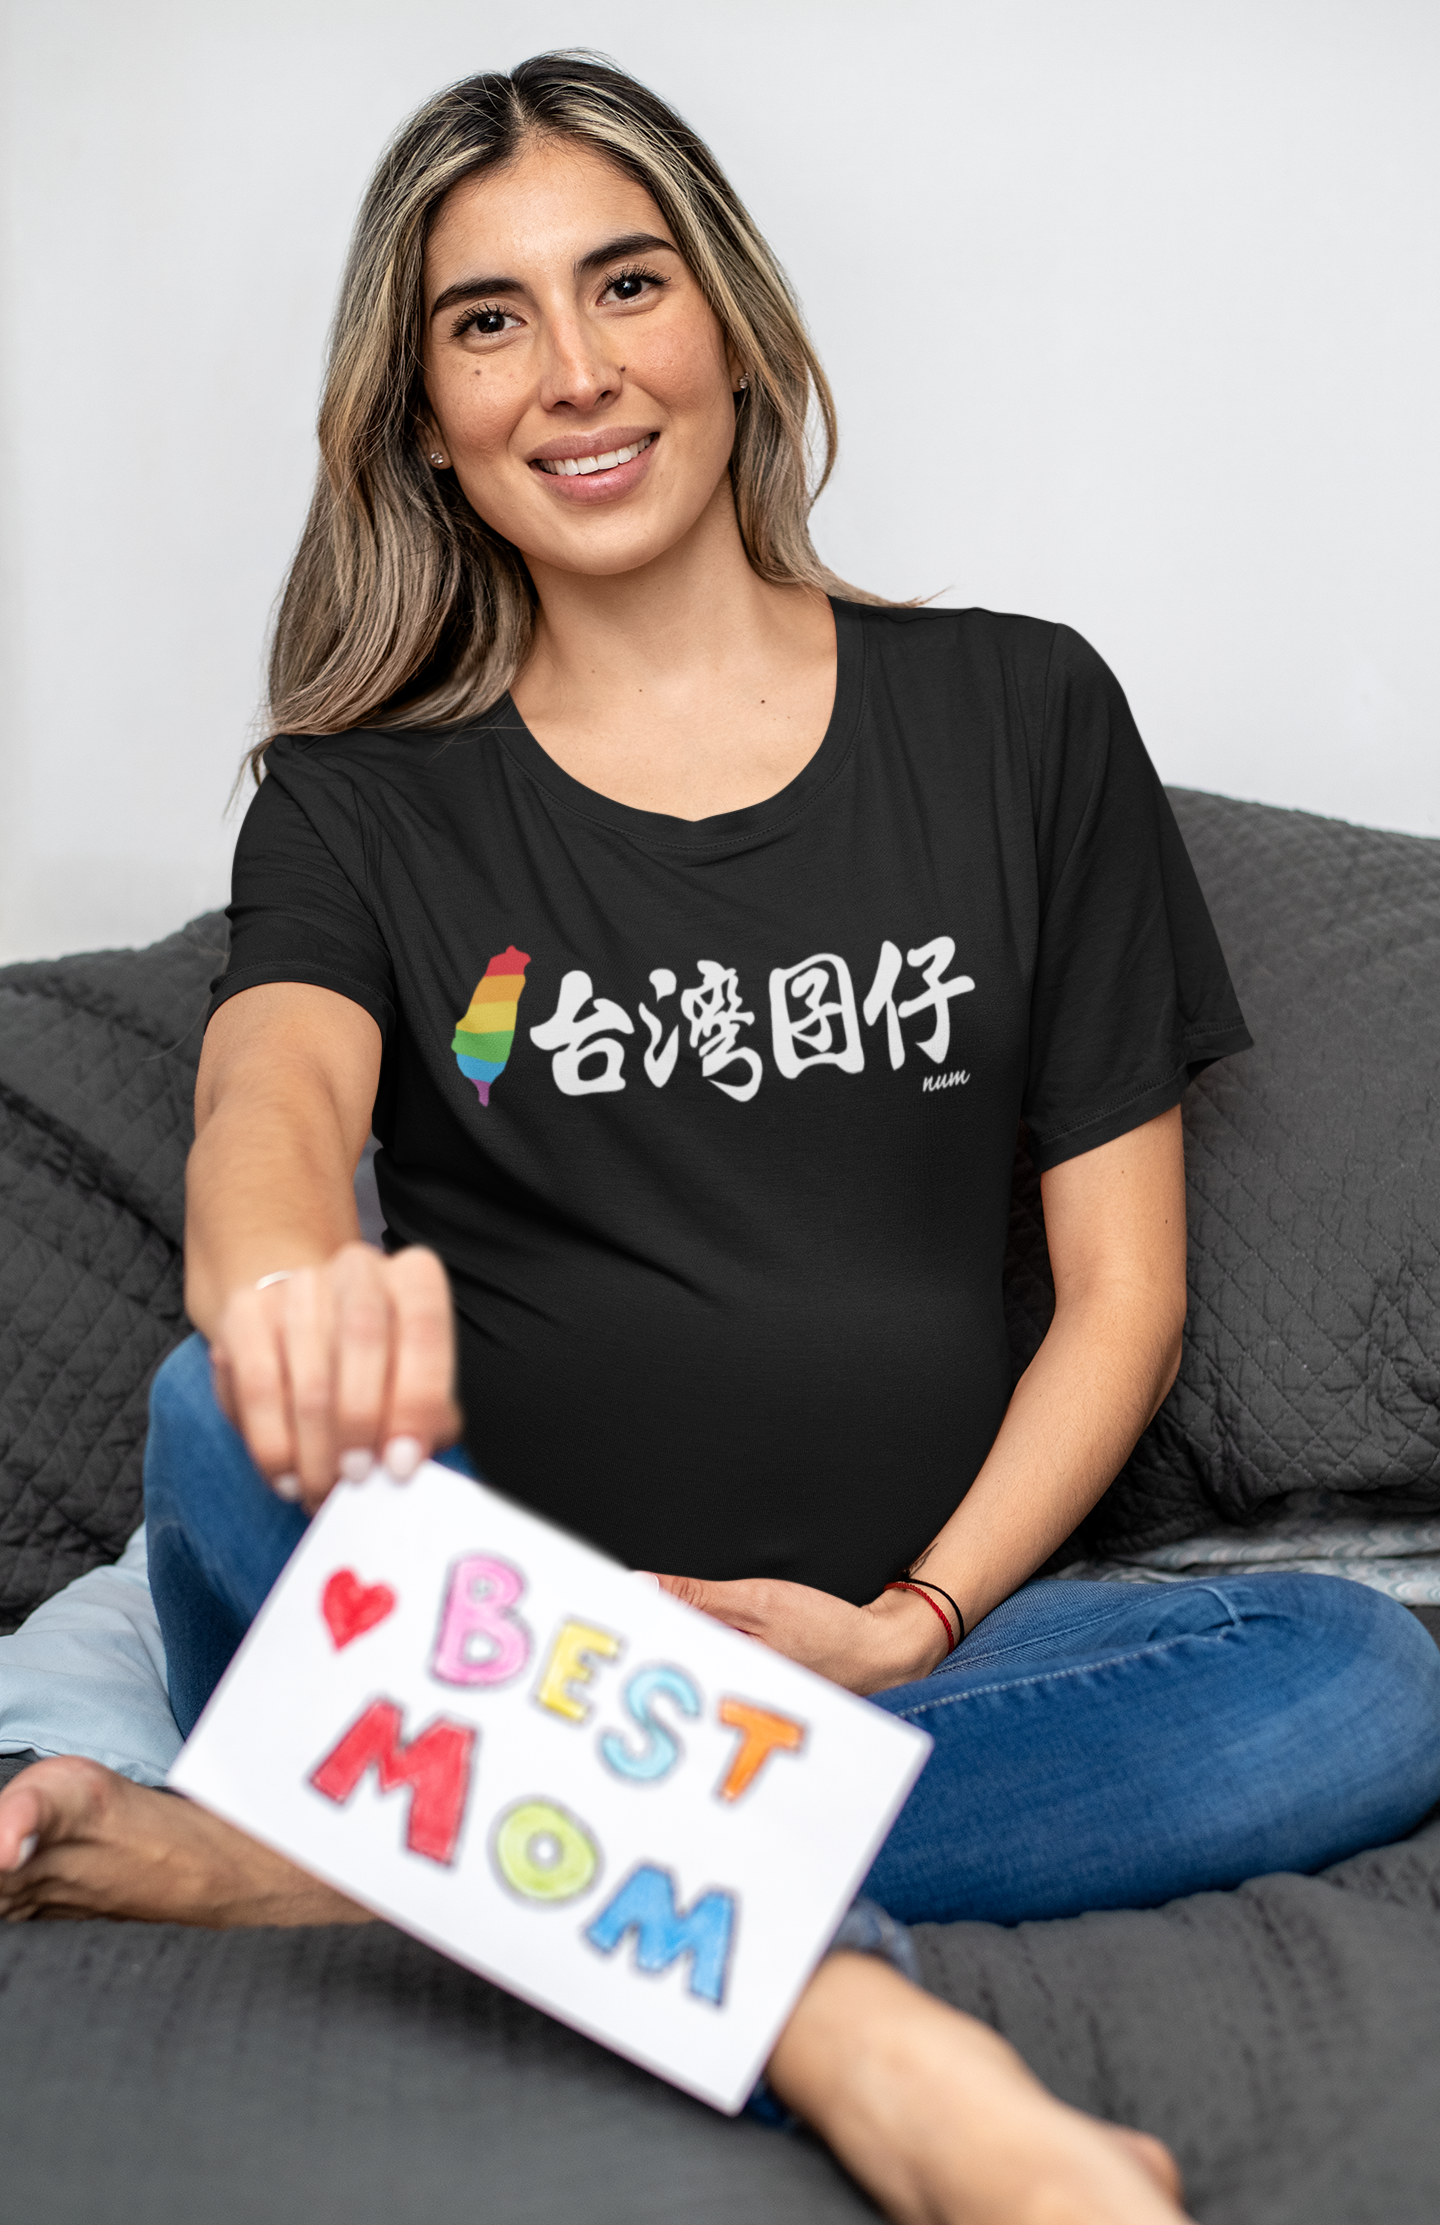 t-shirt-mockup-featuring-a-pregnant-woman-sitting-on-a-couch-32247.png